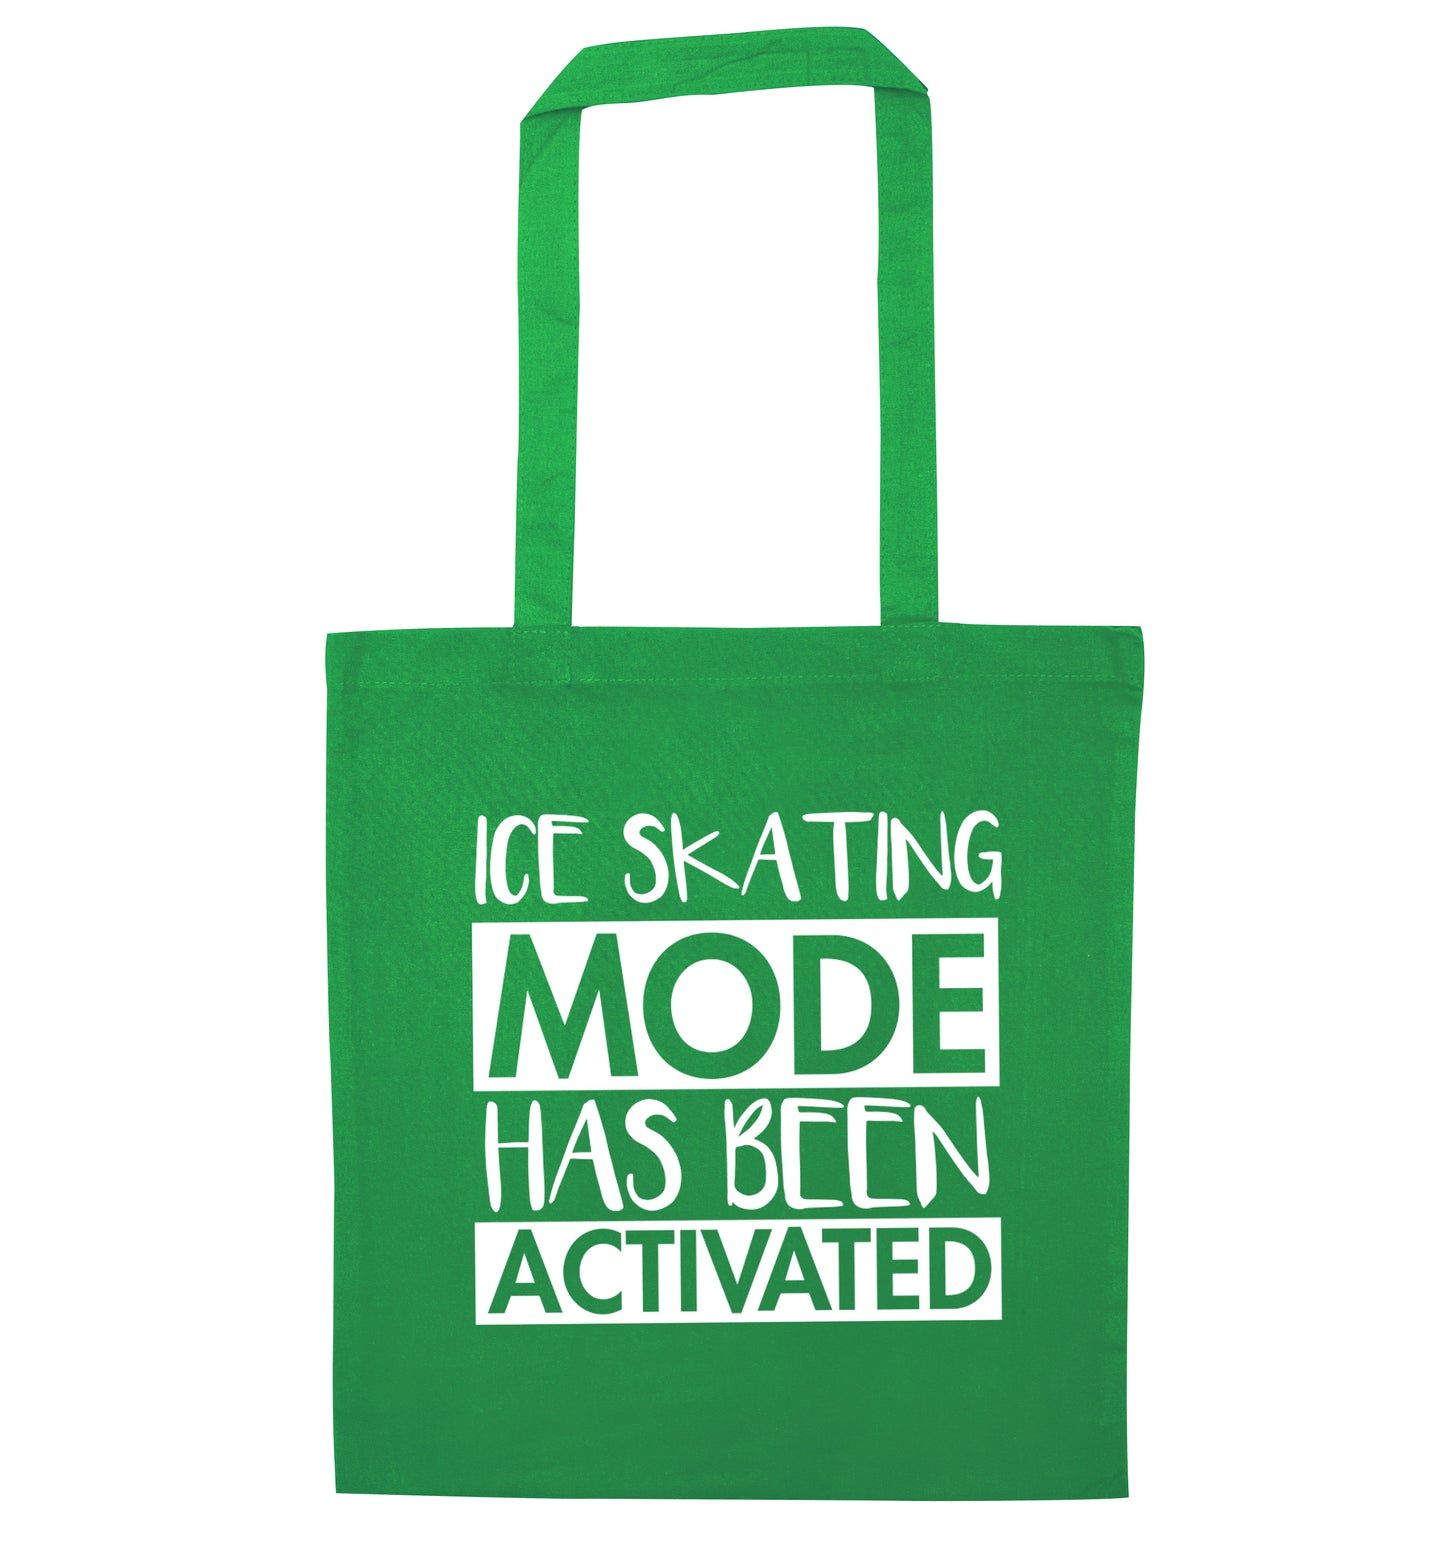 Ice skating mode activated green tote bag